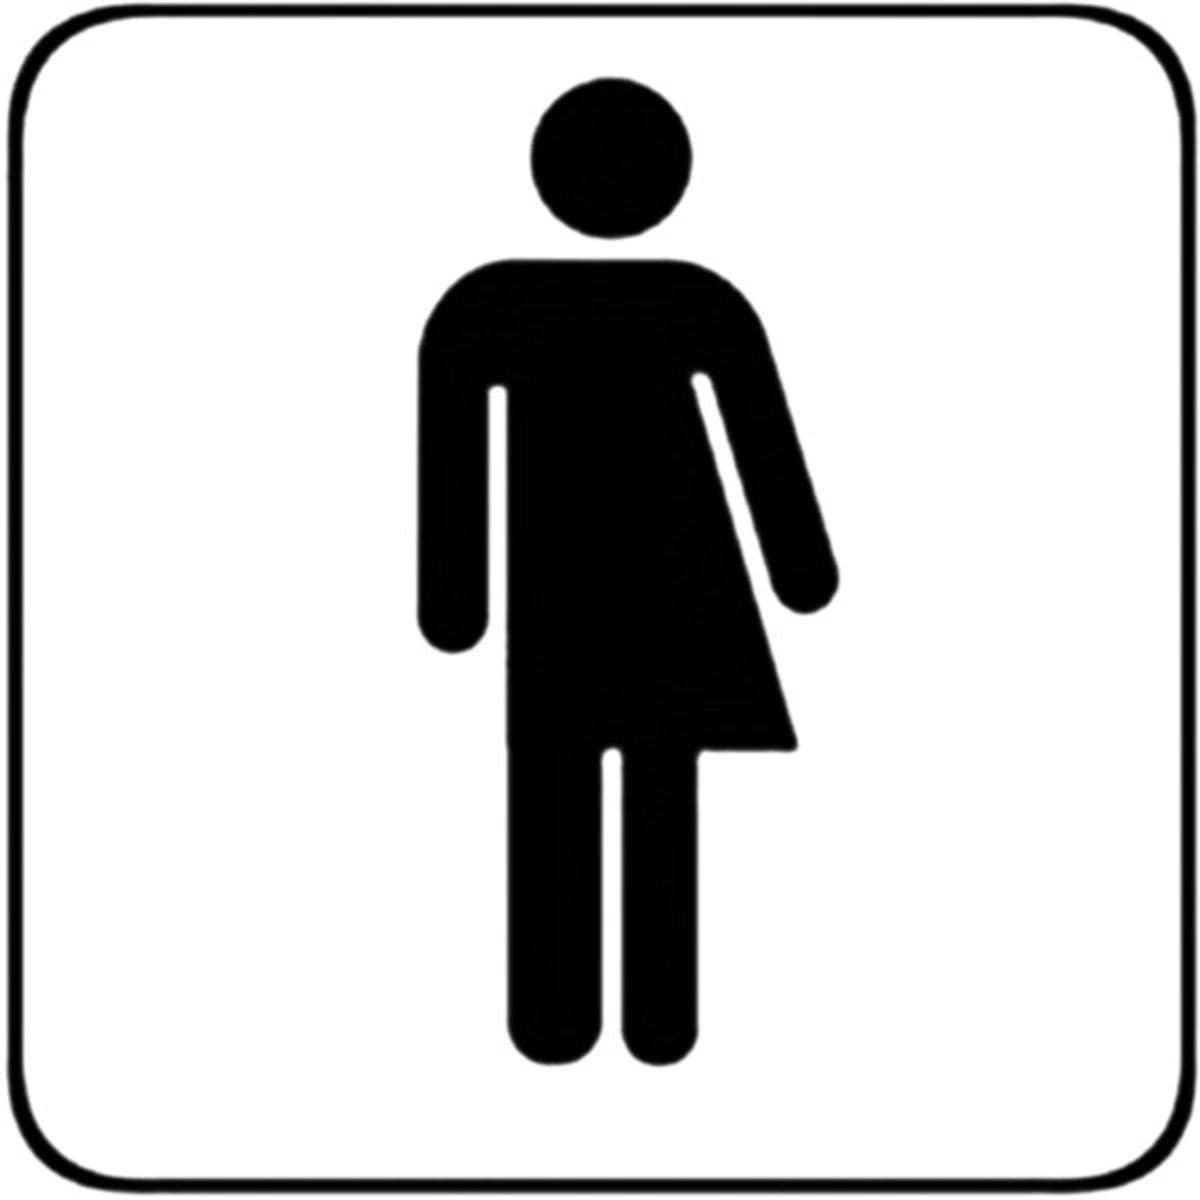 Separate vs. Unisex Bathrooms: The Pros and Cons